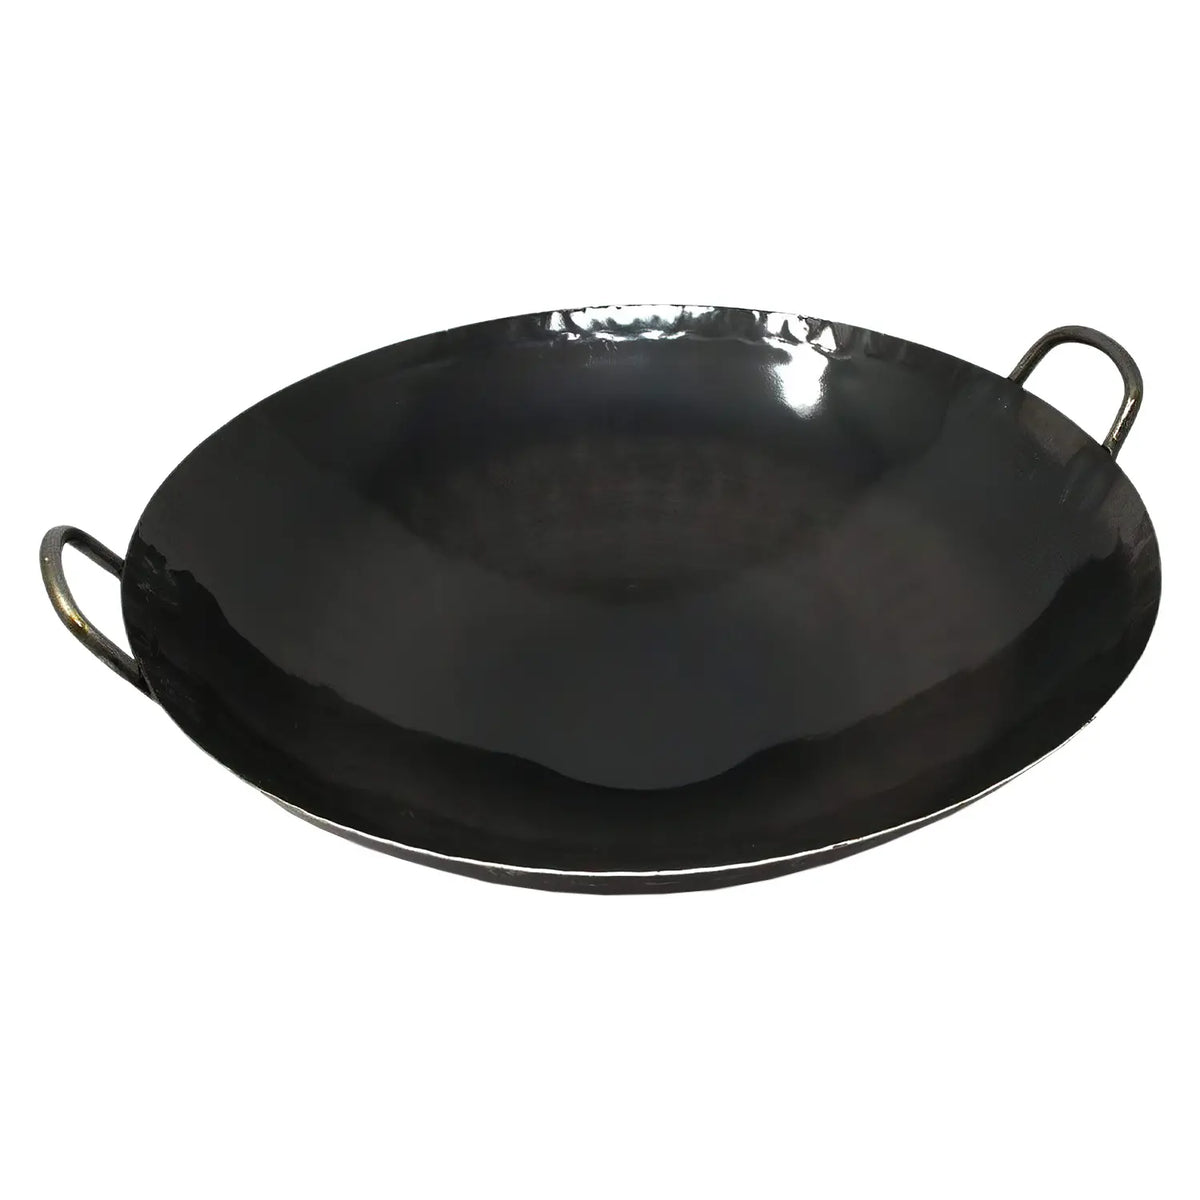 Yamada Hammered Iron Welded Double-Handle Wok (1.2mm Thickness)